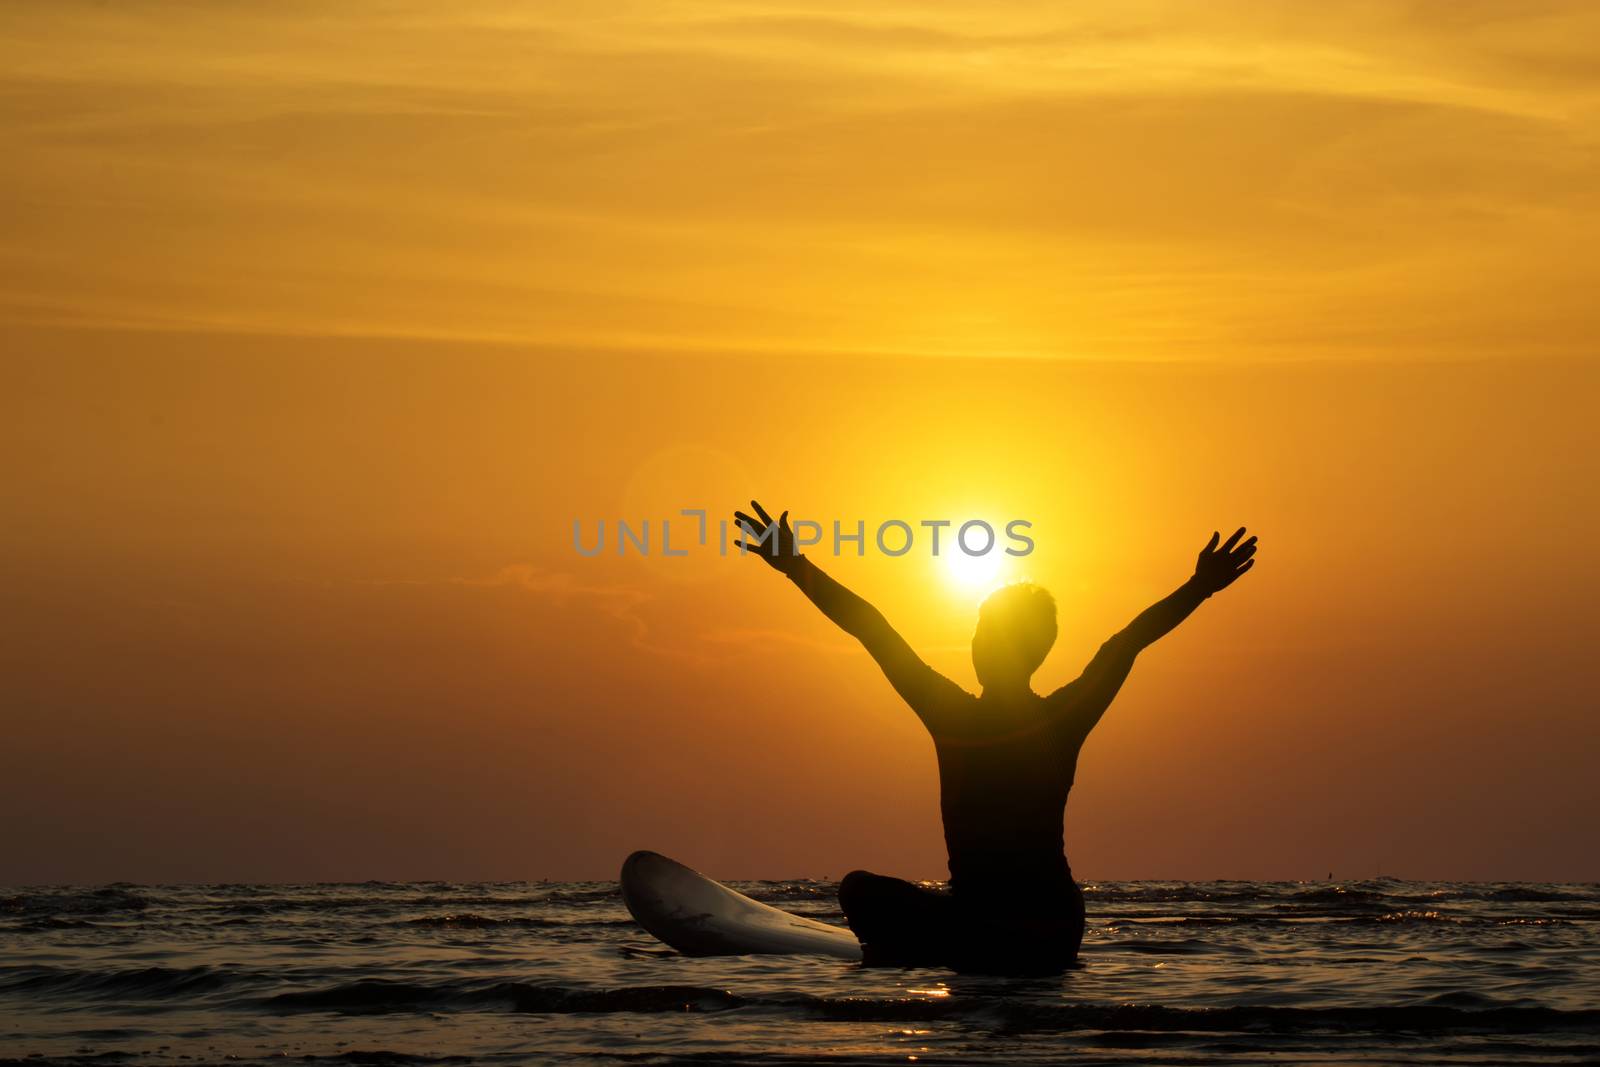 Silhouette of surf man sit on a surfboard, open arms. Surfing at sunset beach. Outdoor water sport adventure lifestyle.Summer activity. Handsome Asia male model in his 20s. by asiandelight